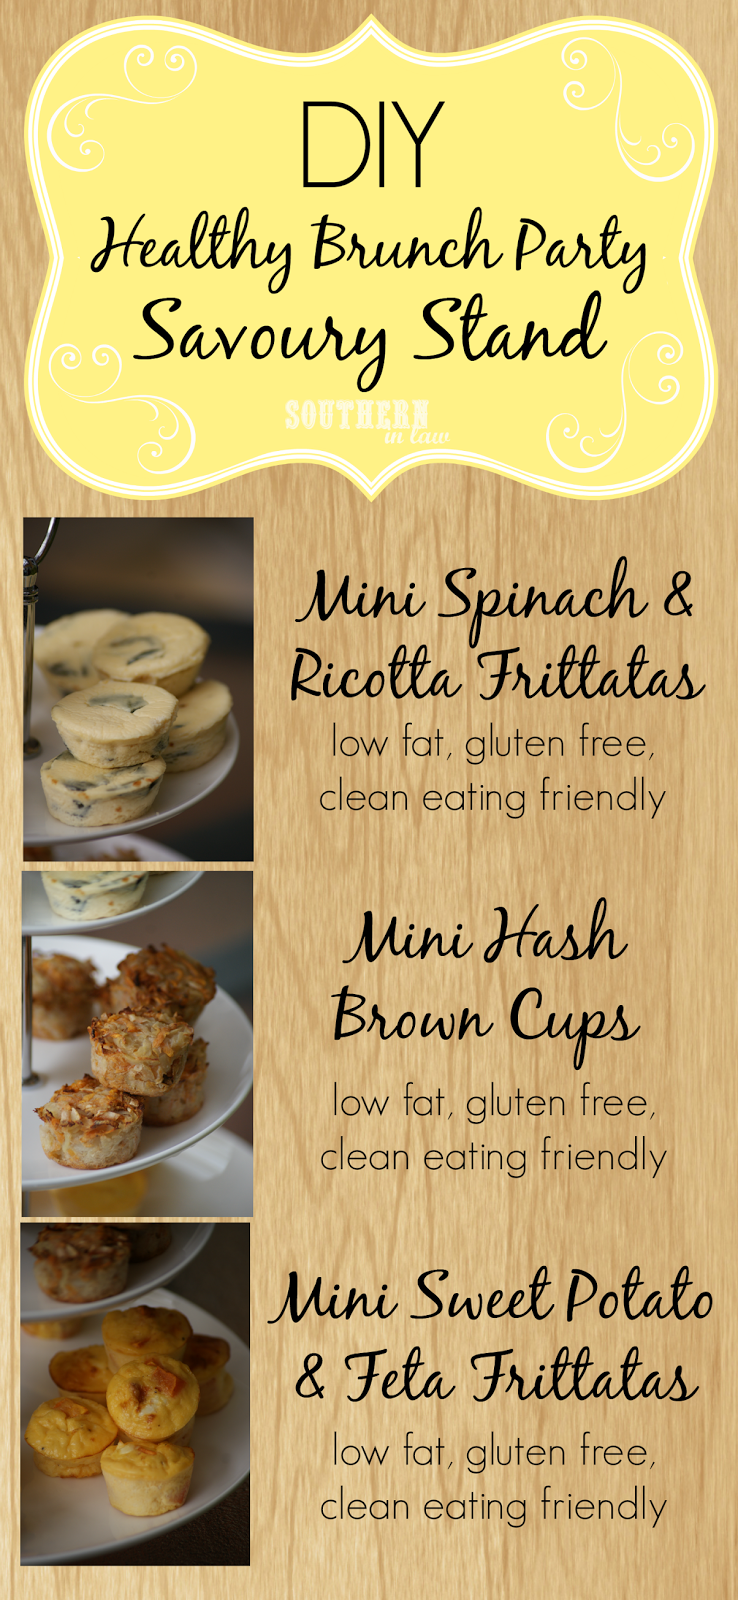 How to host your own healthy brunch party - Healthy savoury stand - Mini frittatas and mini hash brown cups